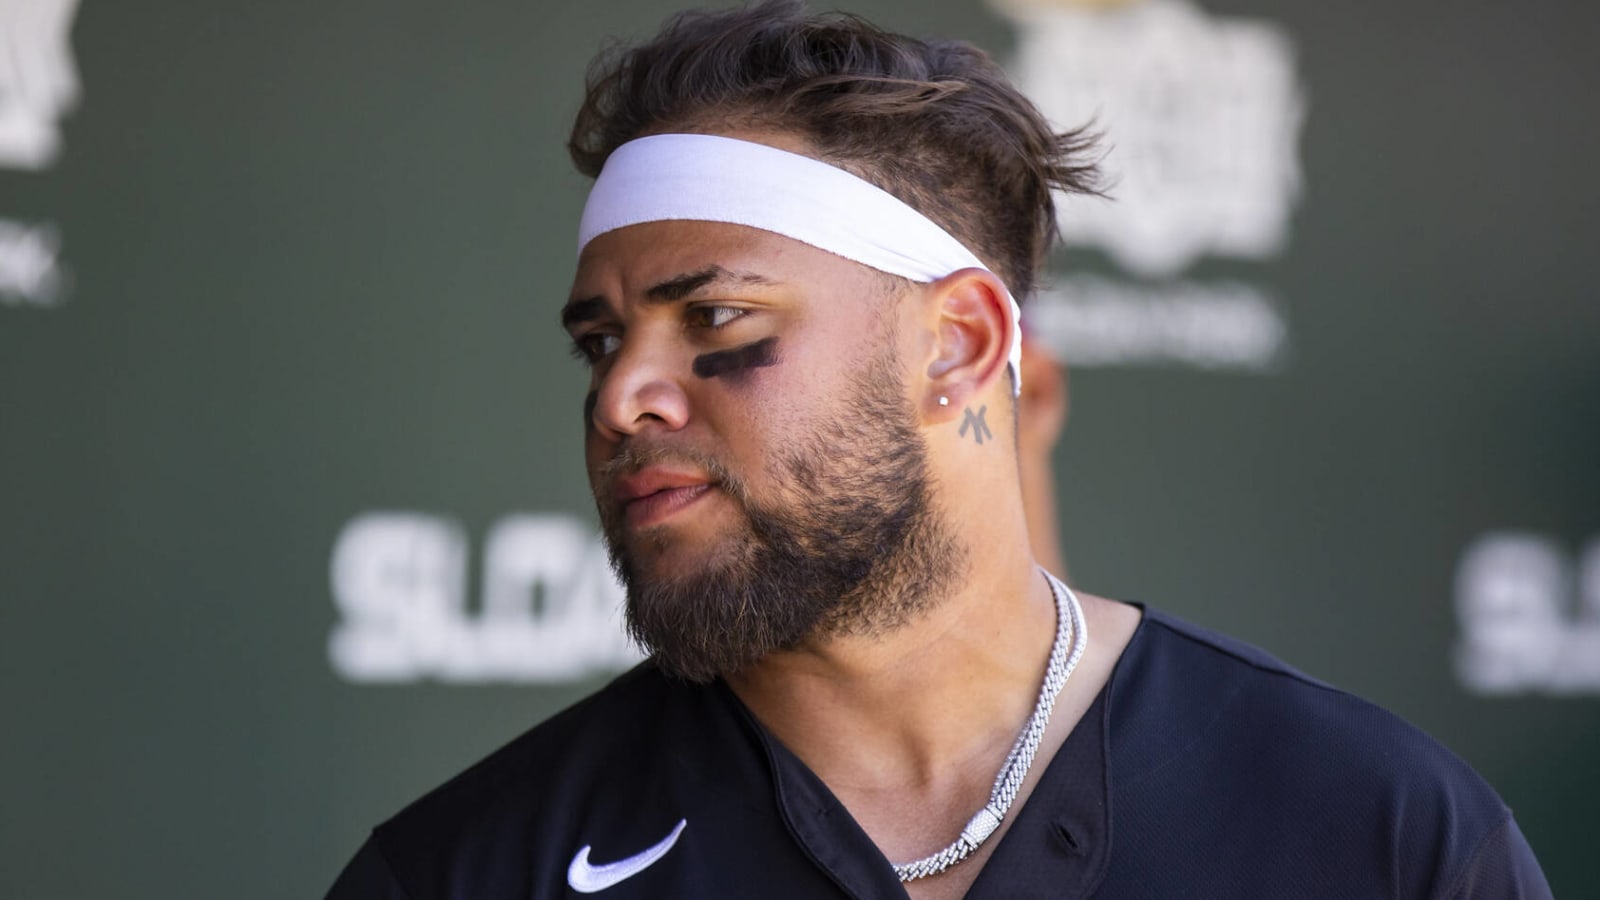 White Sox activate Moncada, Kelly; Bummer placed on IL